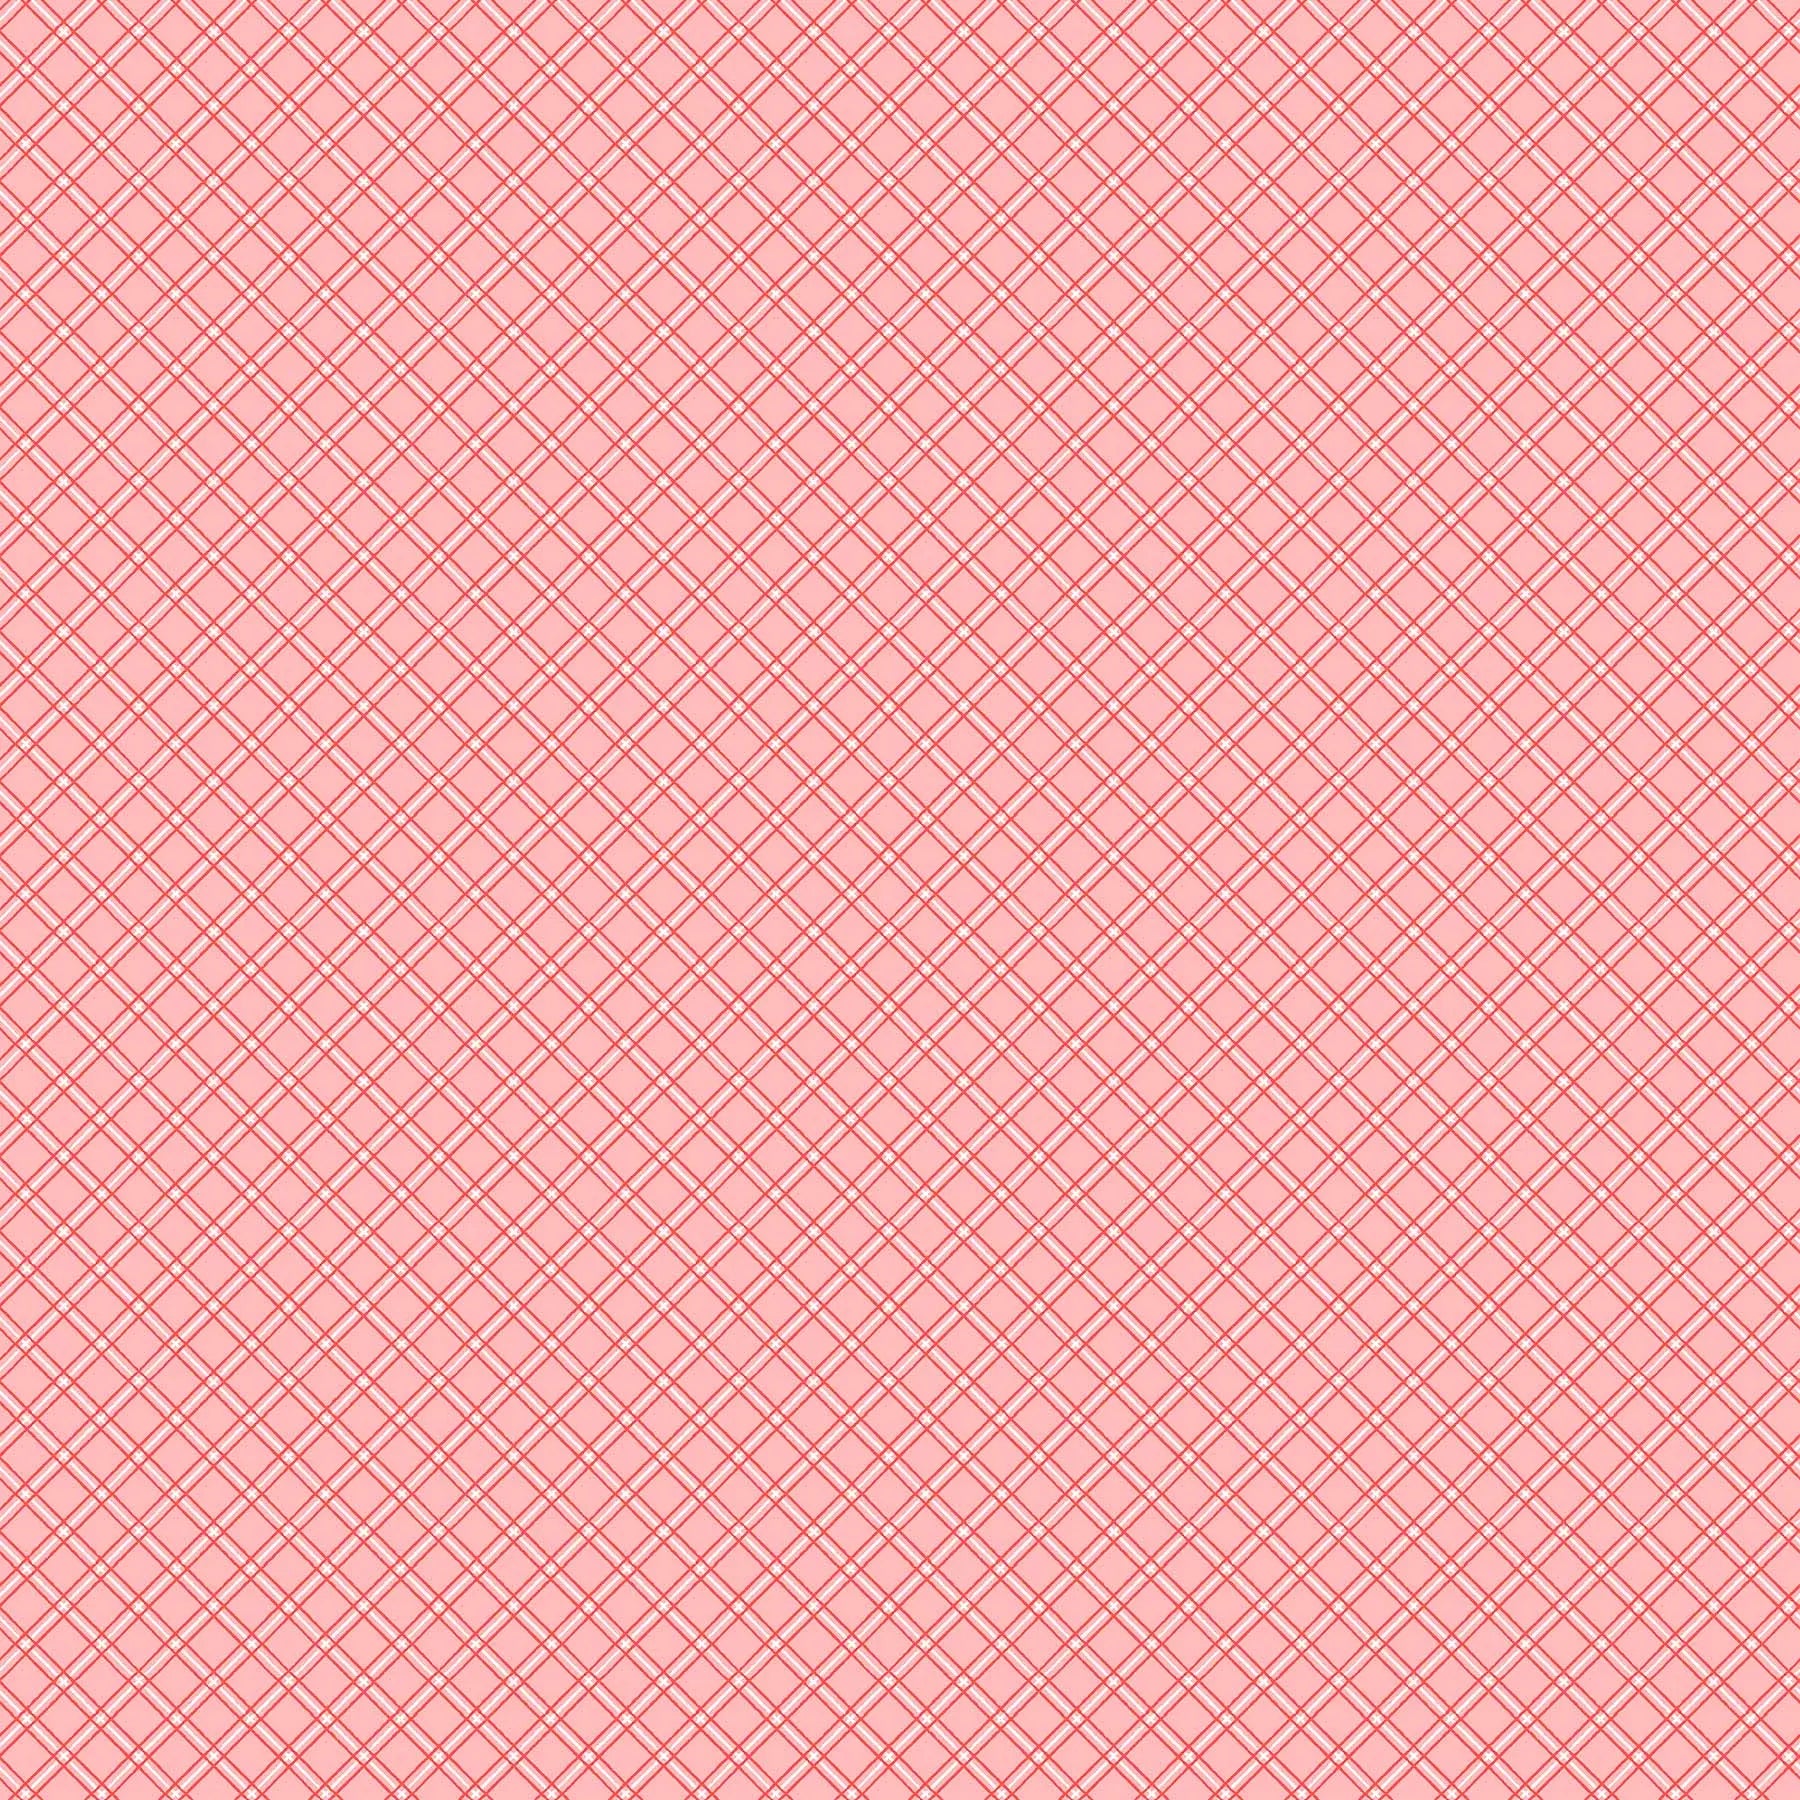 Pink Candy Stripe Plaid Cotton Fabric per yard - Linda's Electric Quilters